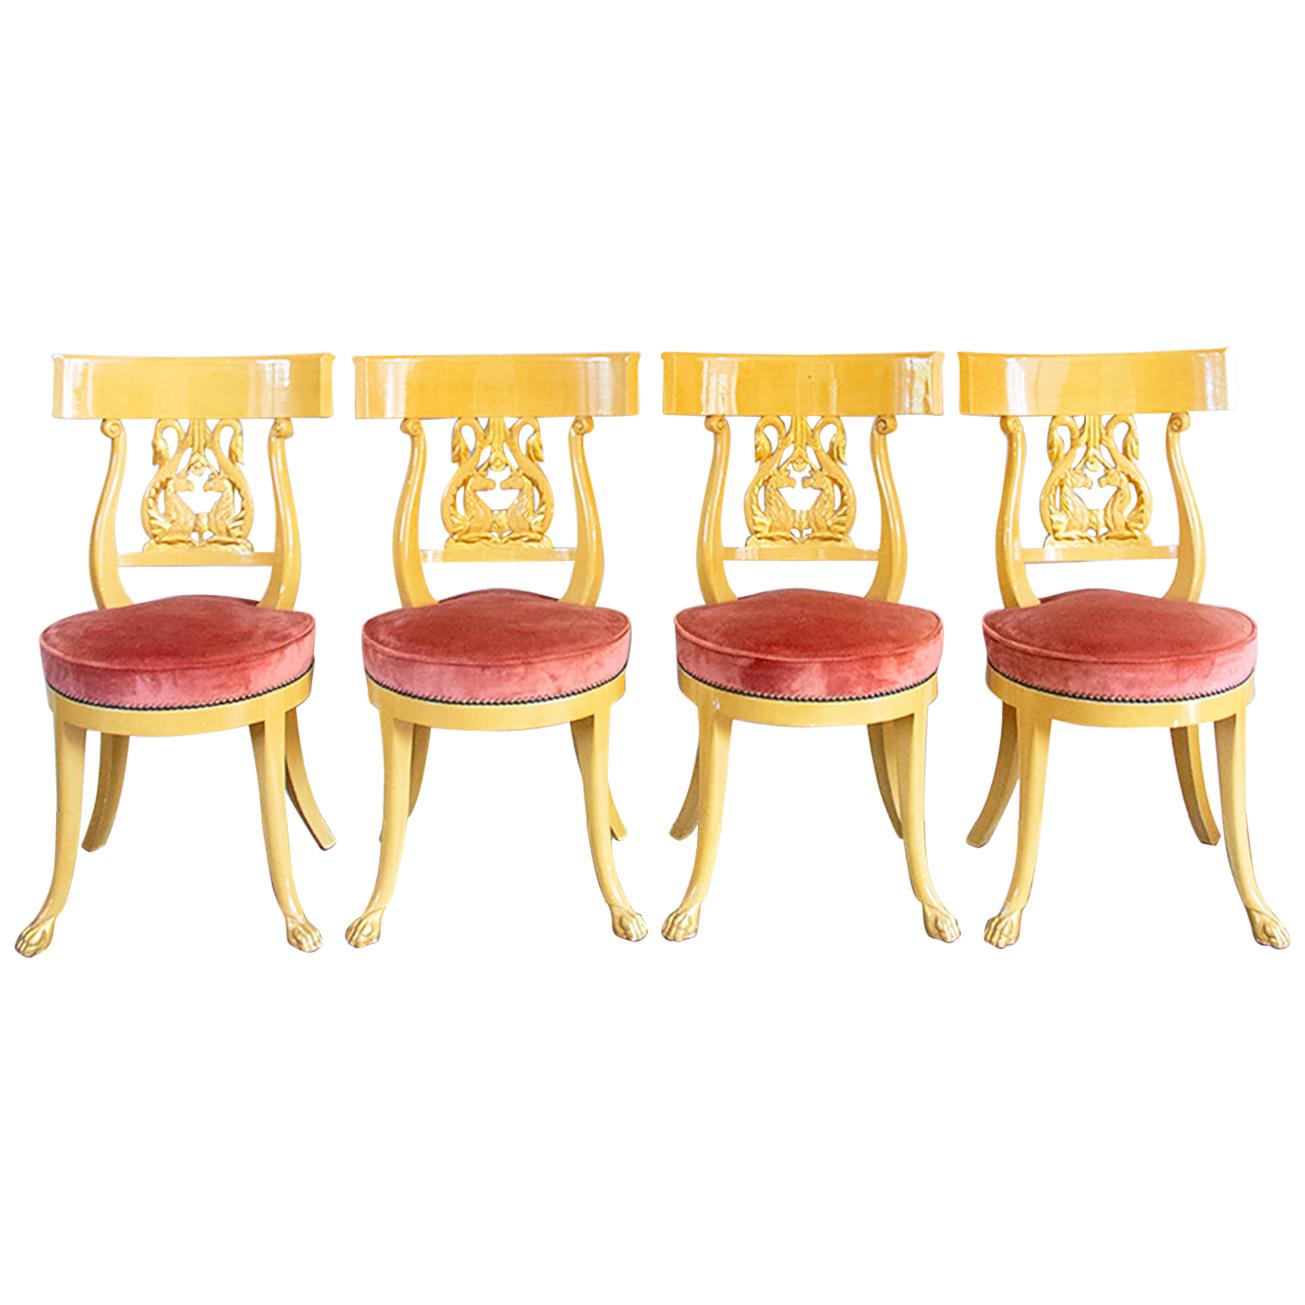 Superb Set of Italian Chairs in Yellow Gold Lacquered Wood, circa 1950